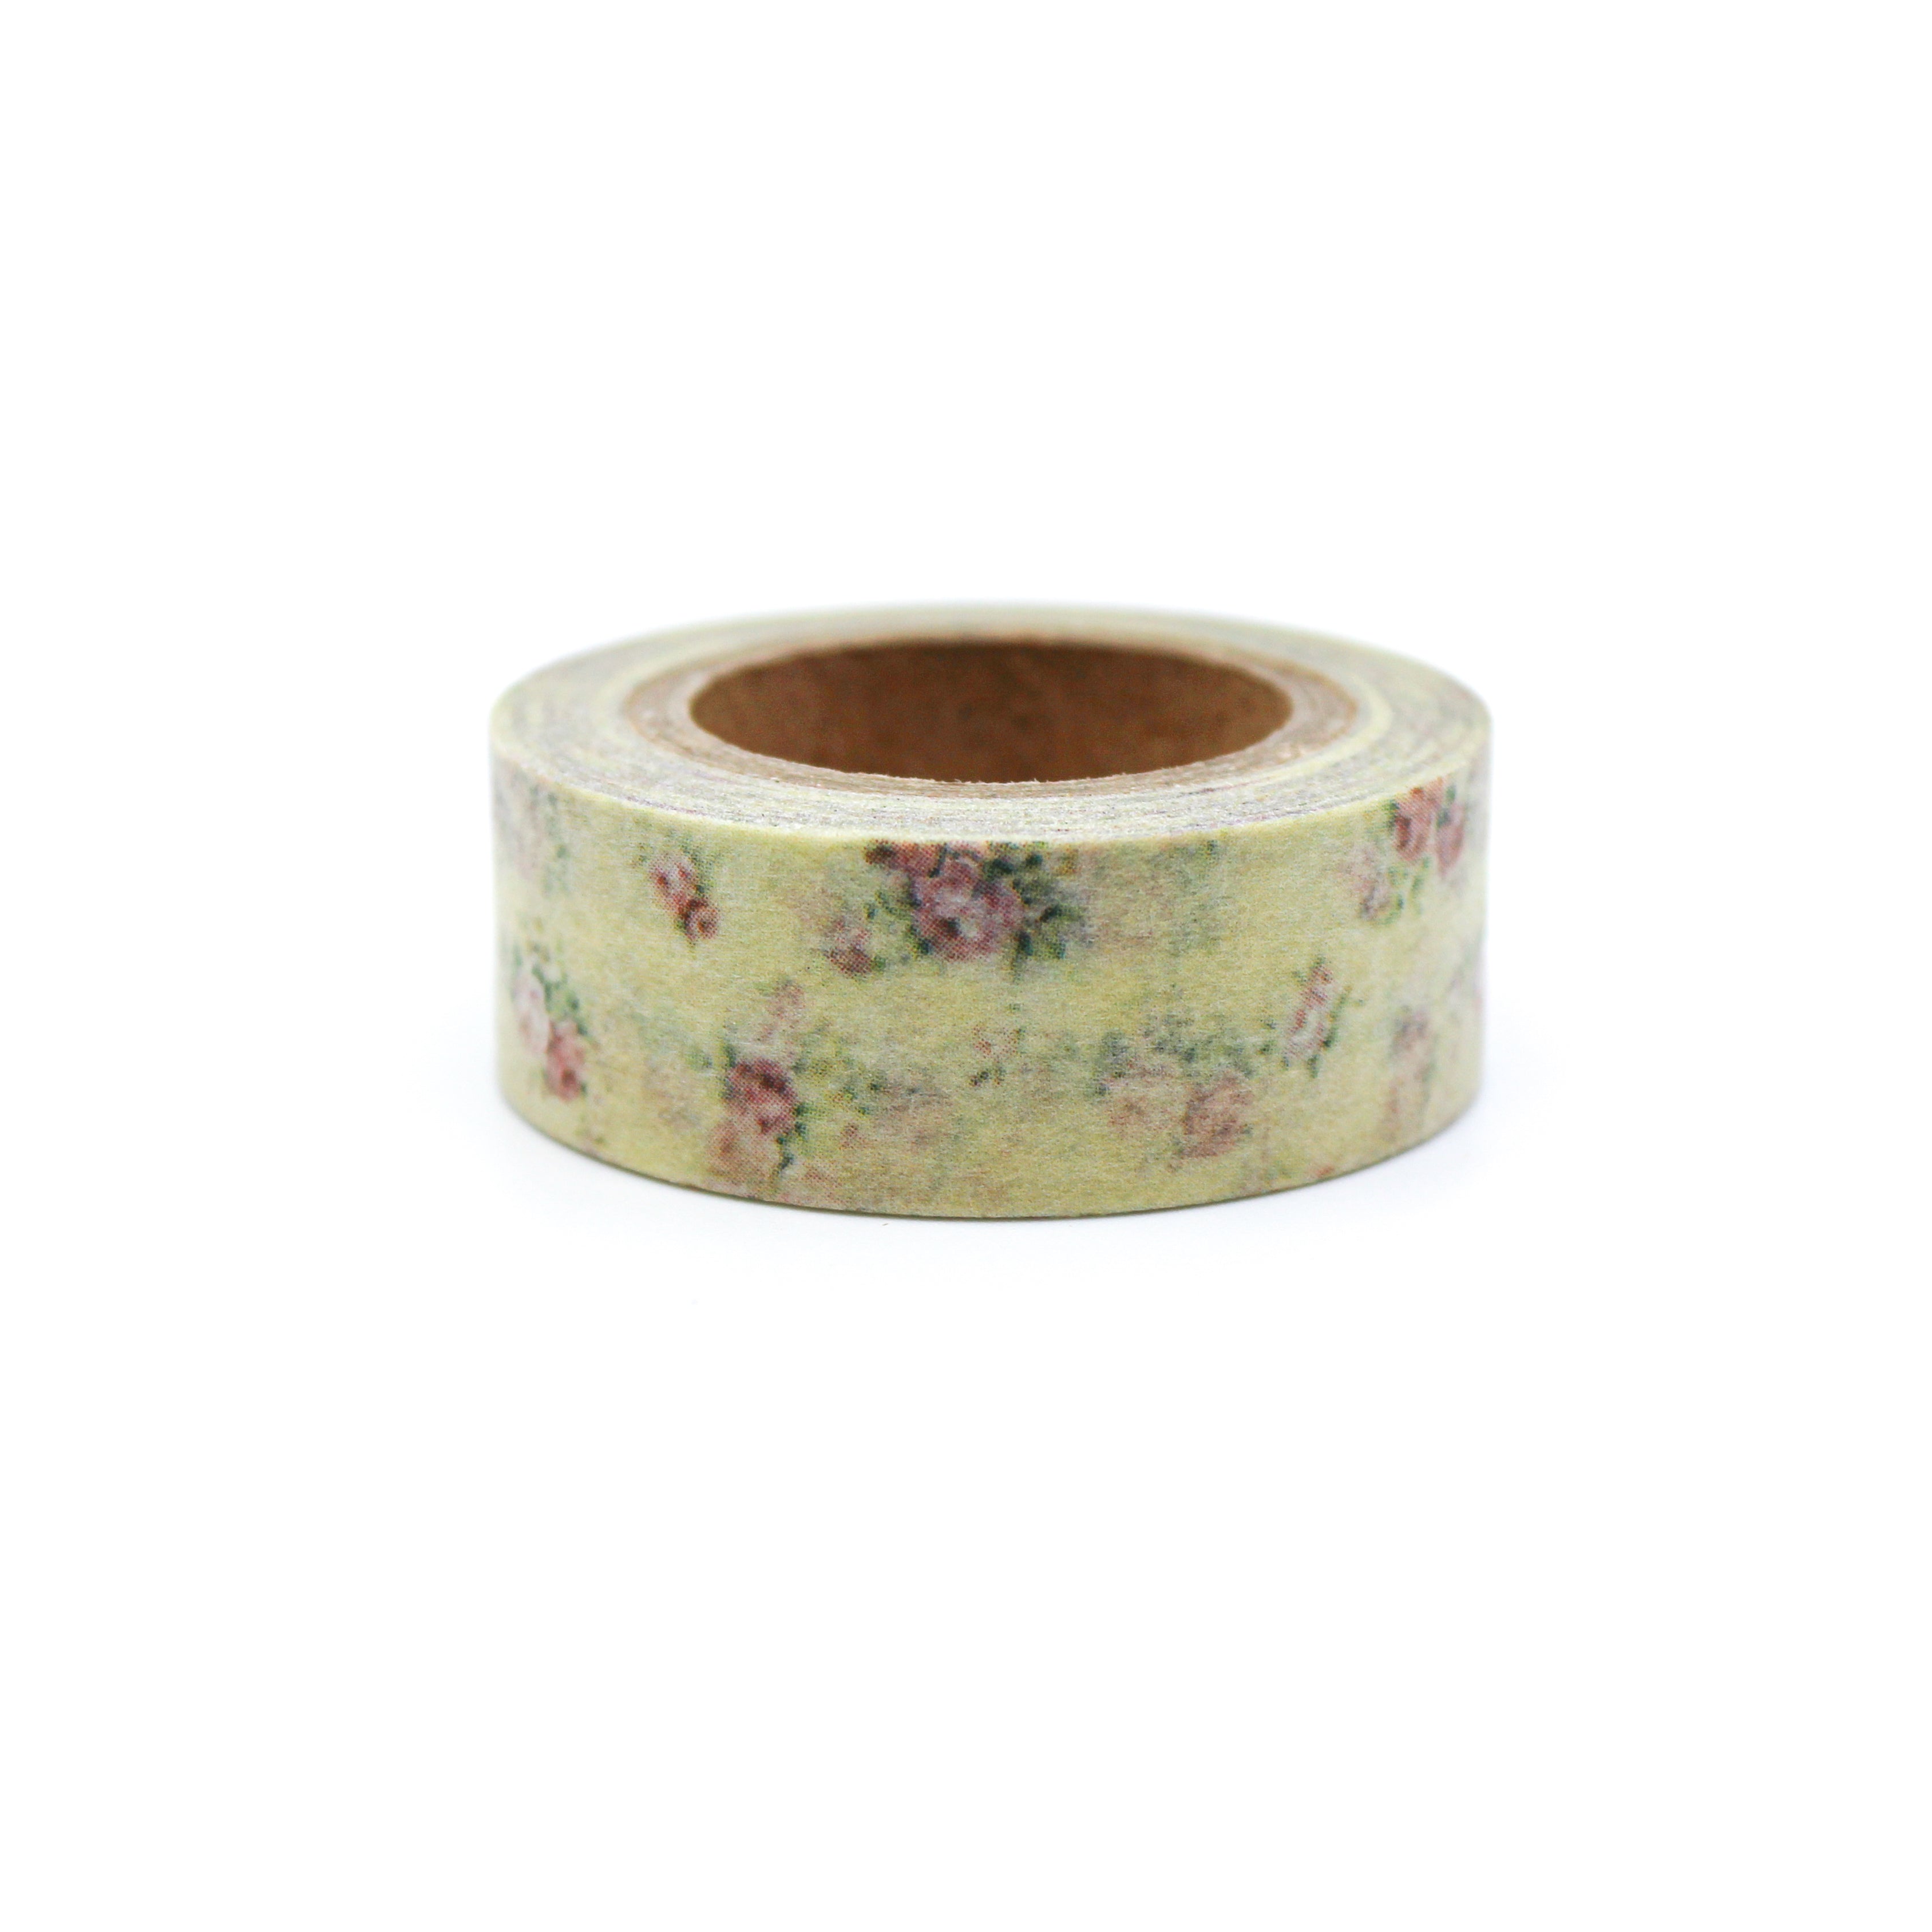 This is a beautiful vintage flowery  design with cream background washi tapes from BBB Supplies Craft Shop